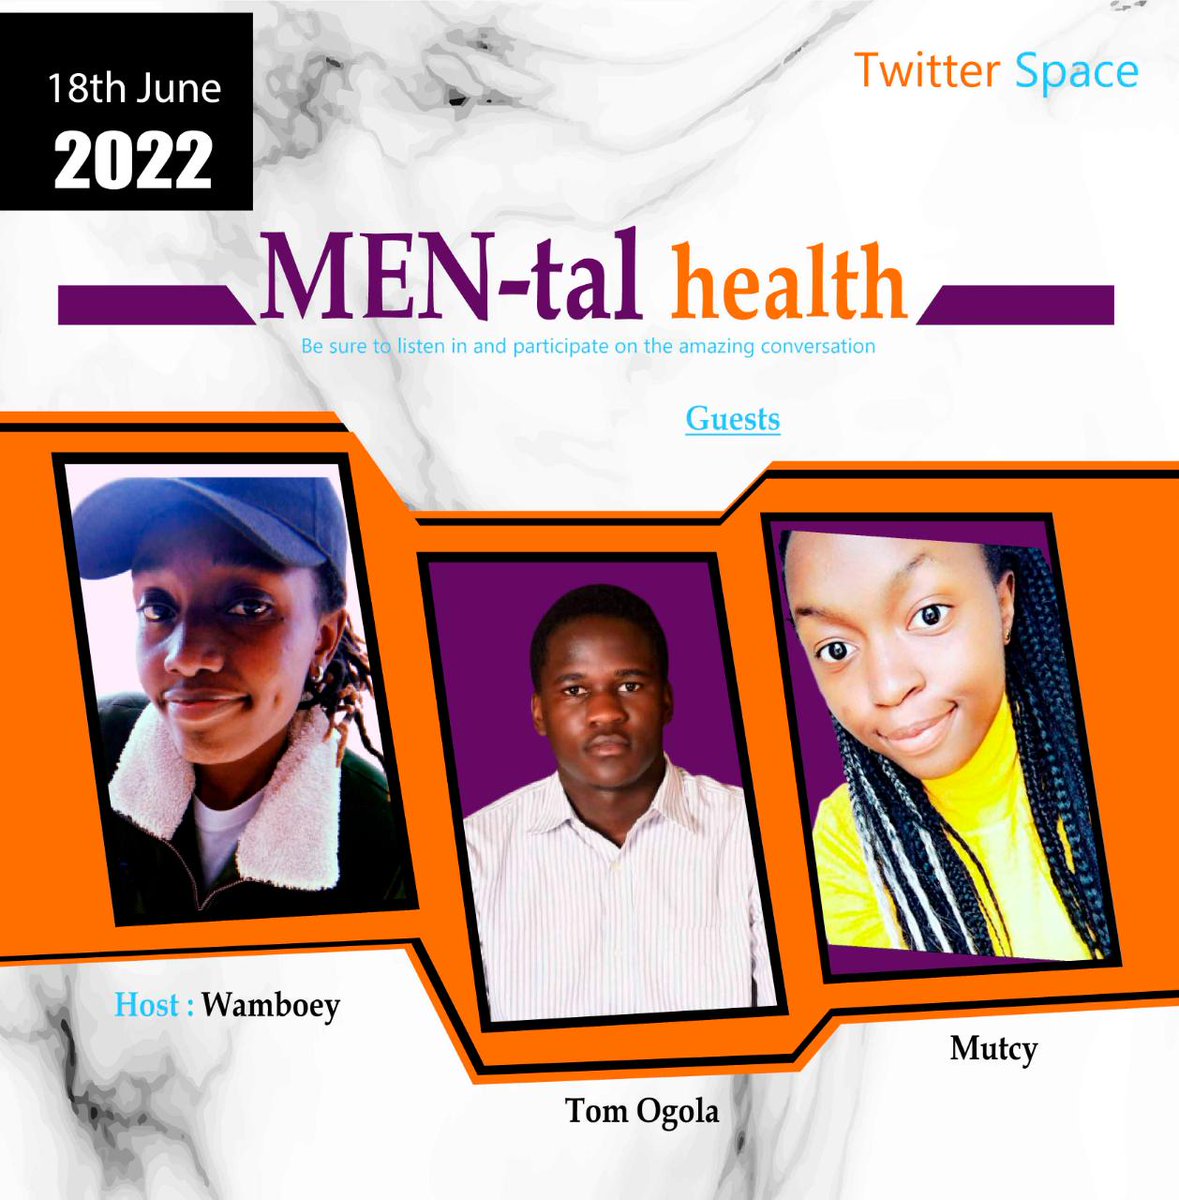 Its the last day of #mensmentalhealthweek and few hours to #FathersDay2022 .
Join us tonight as we talk about Men-tal health. 
Hosted by : @Wamboey2
We are creating safe environments for men 
#saturdayplan